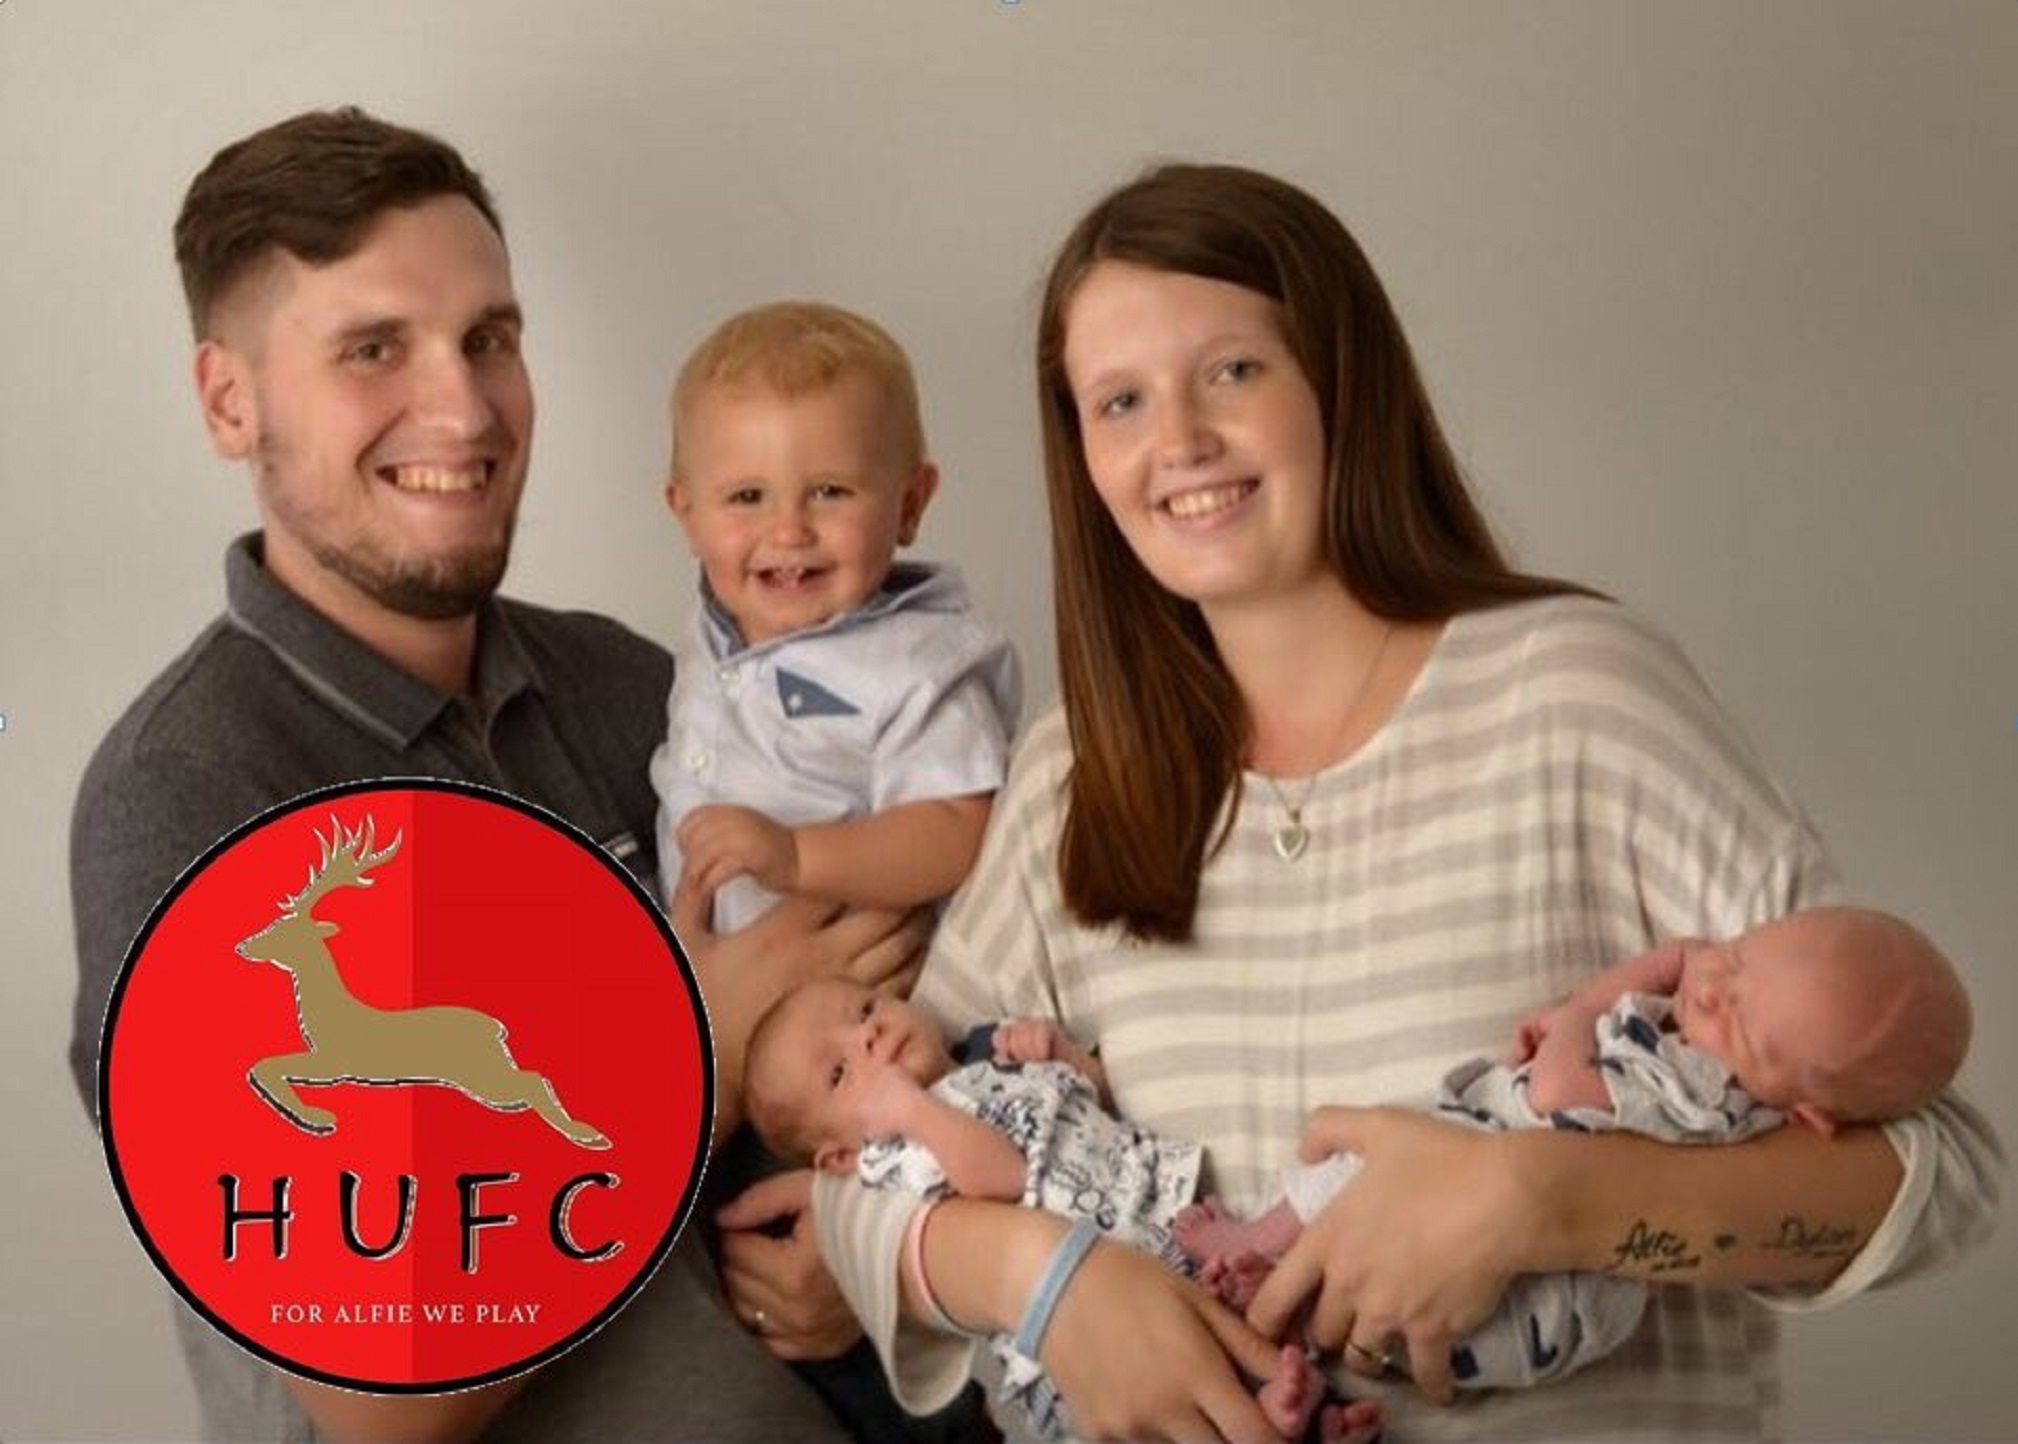 Andrew Calvert, who has set up Hartham United FC in memory of his son Alfie, with his family